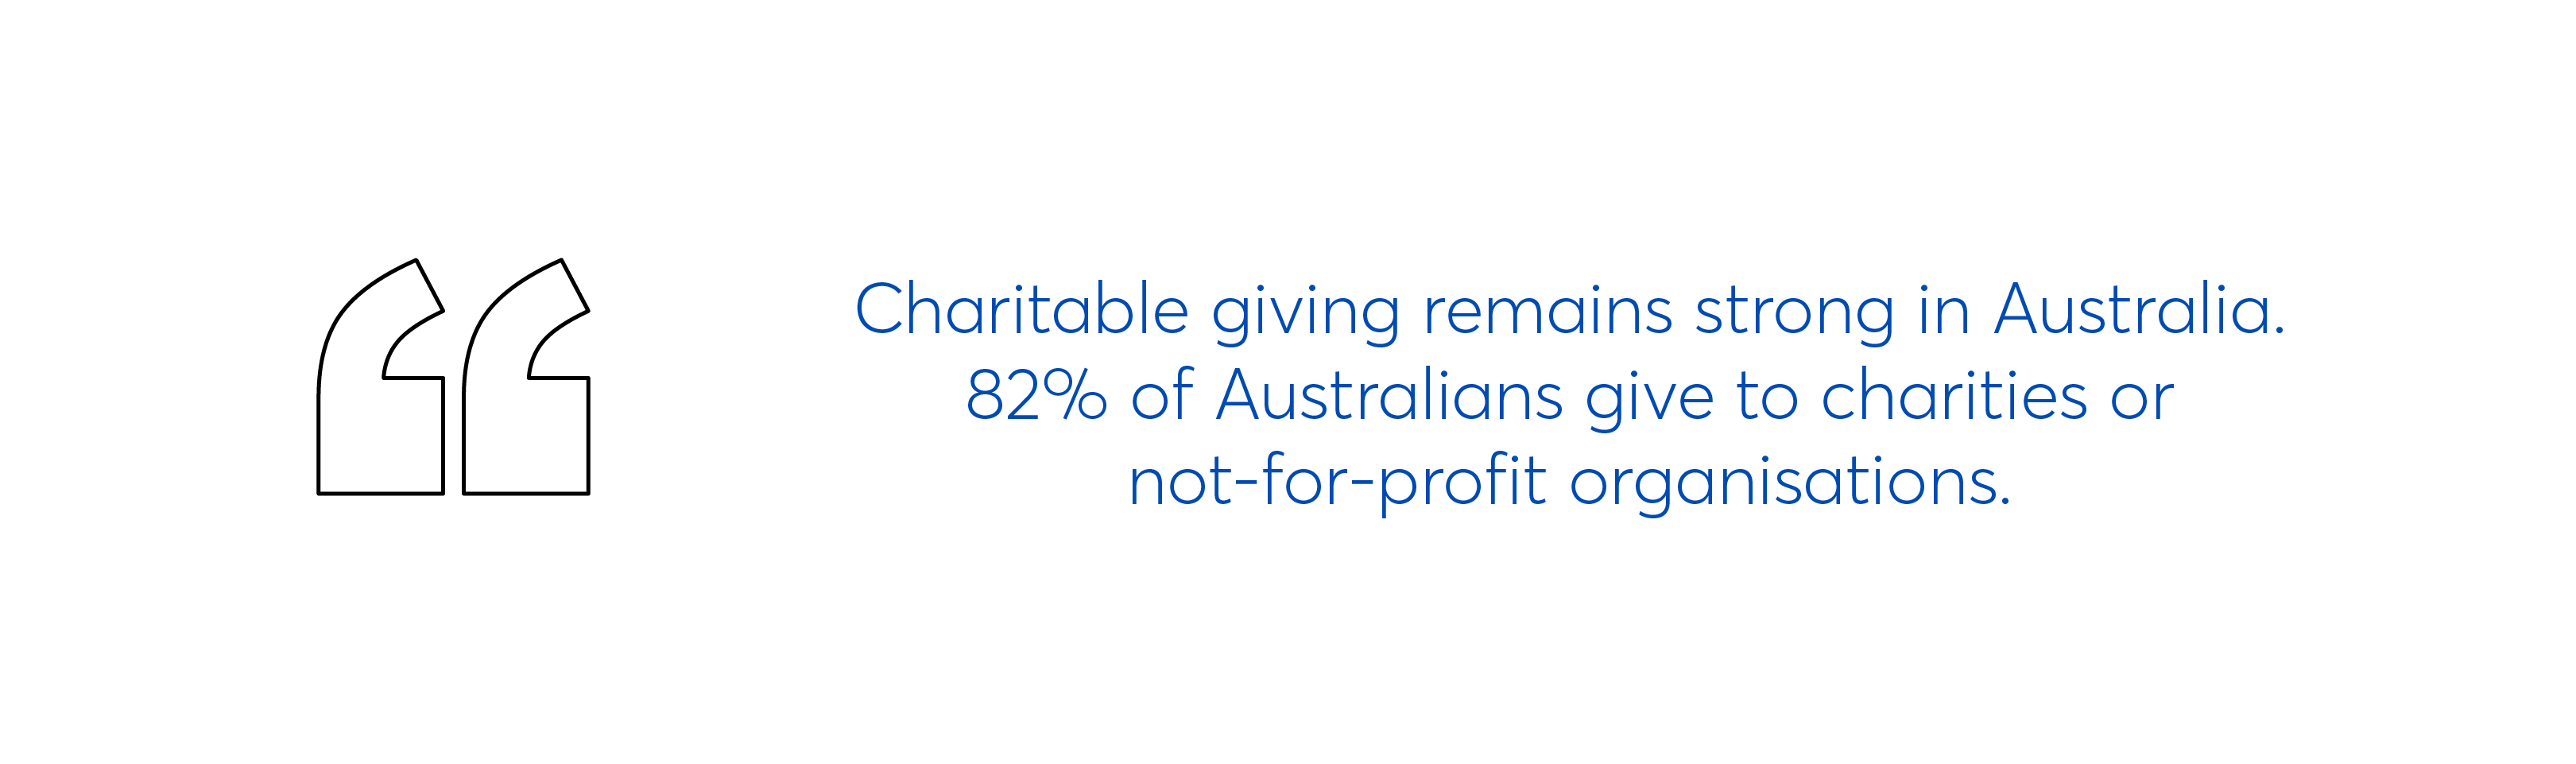 Charitable giving remains strong in Australia